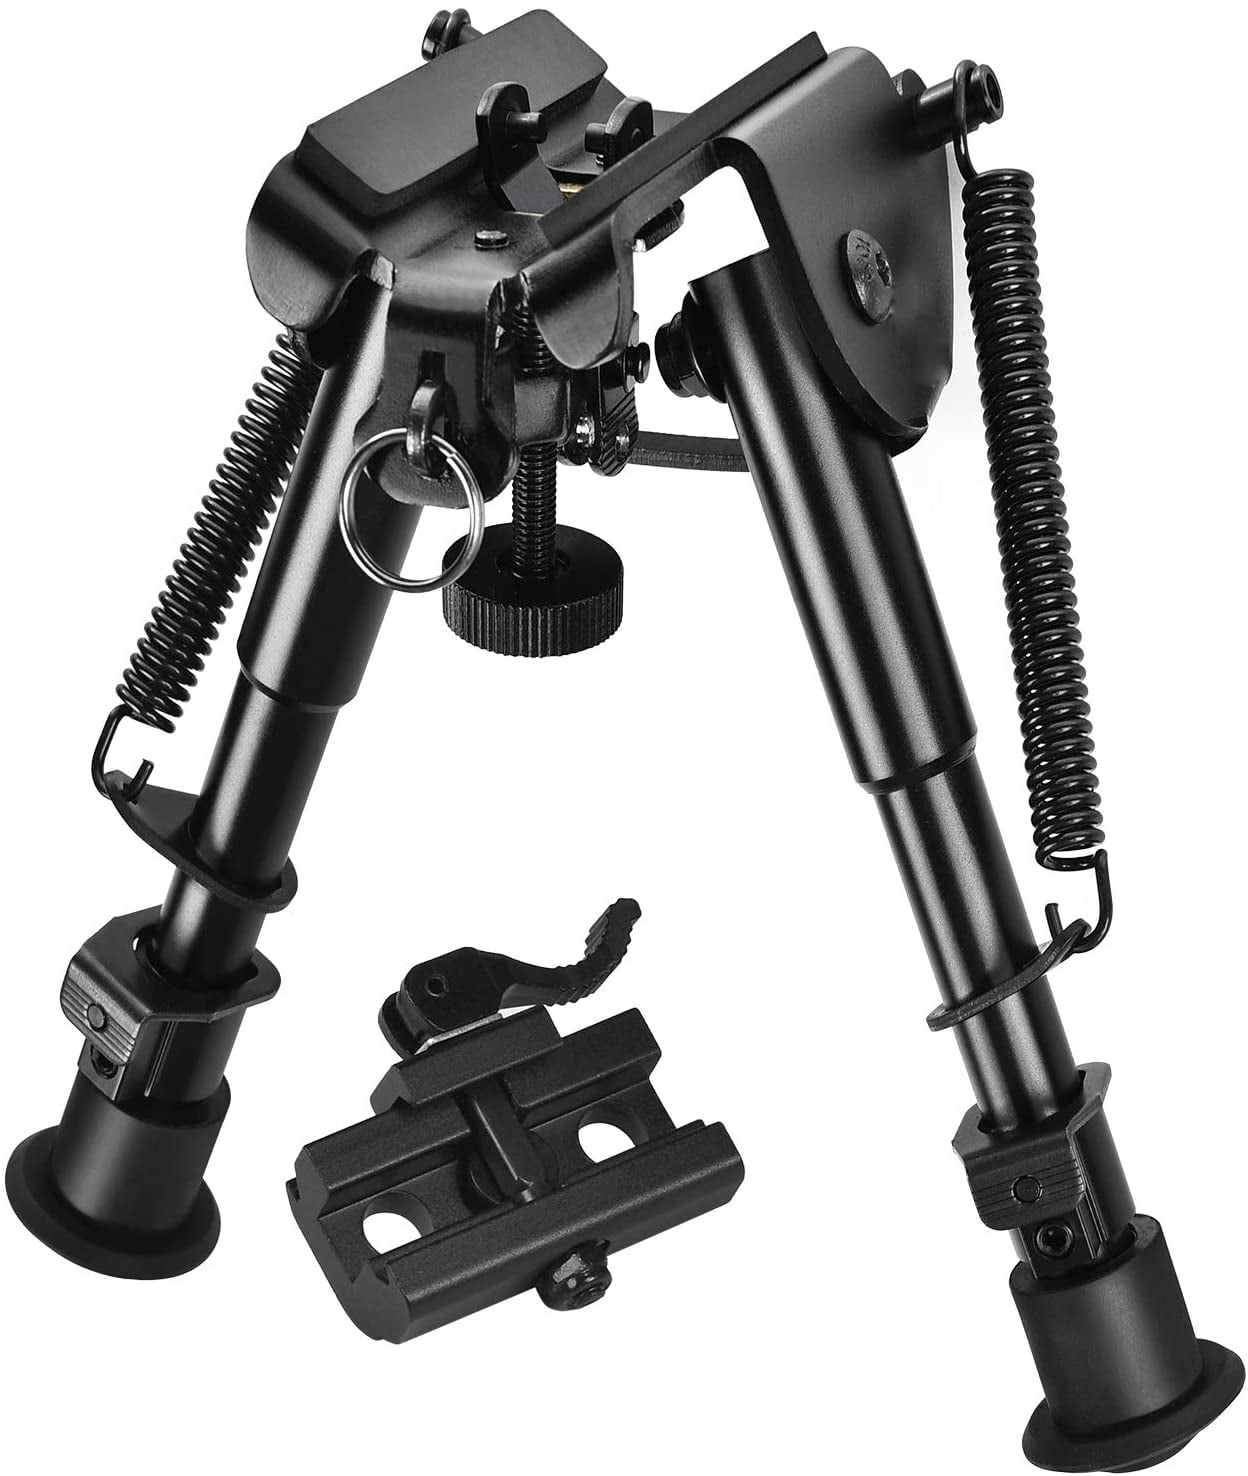 Hunting 6" inch Clamp-on Rifle Bipod Adjustable Picatinny Rail Adapter Mount 